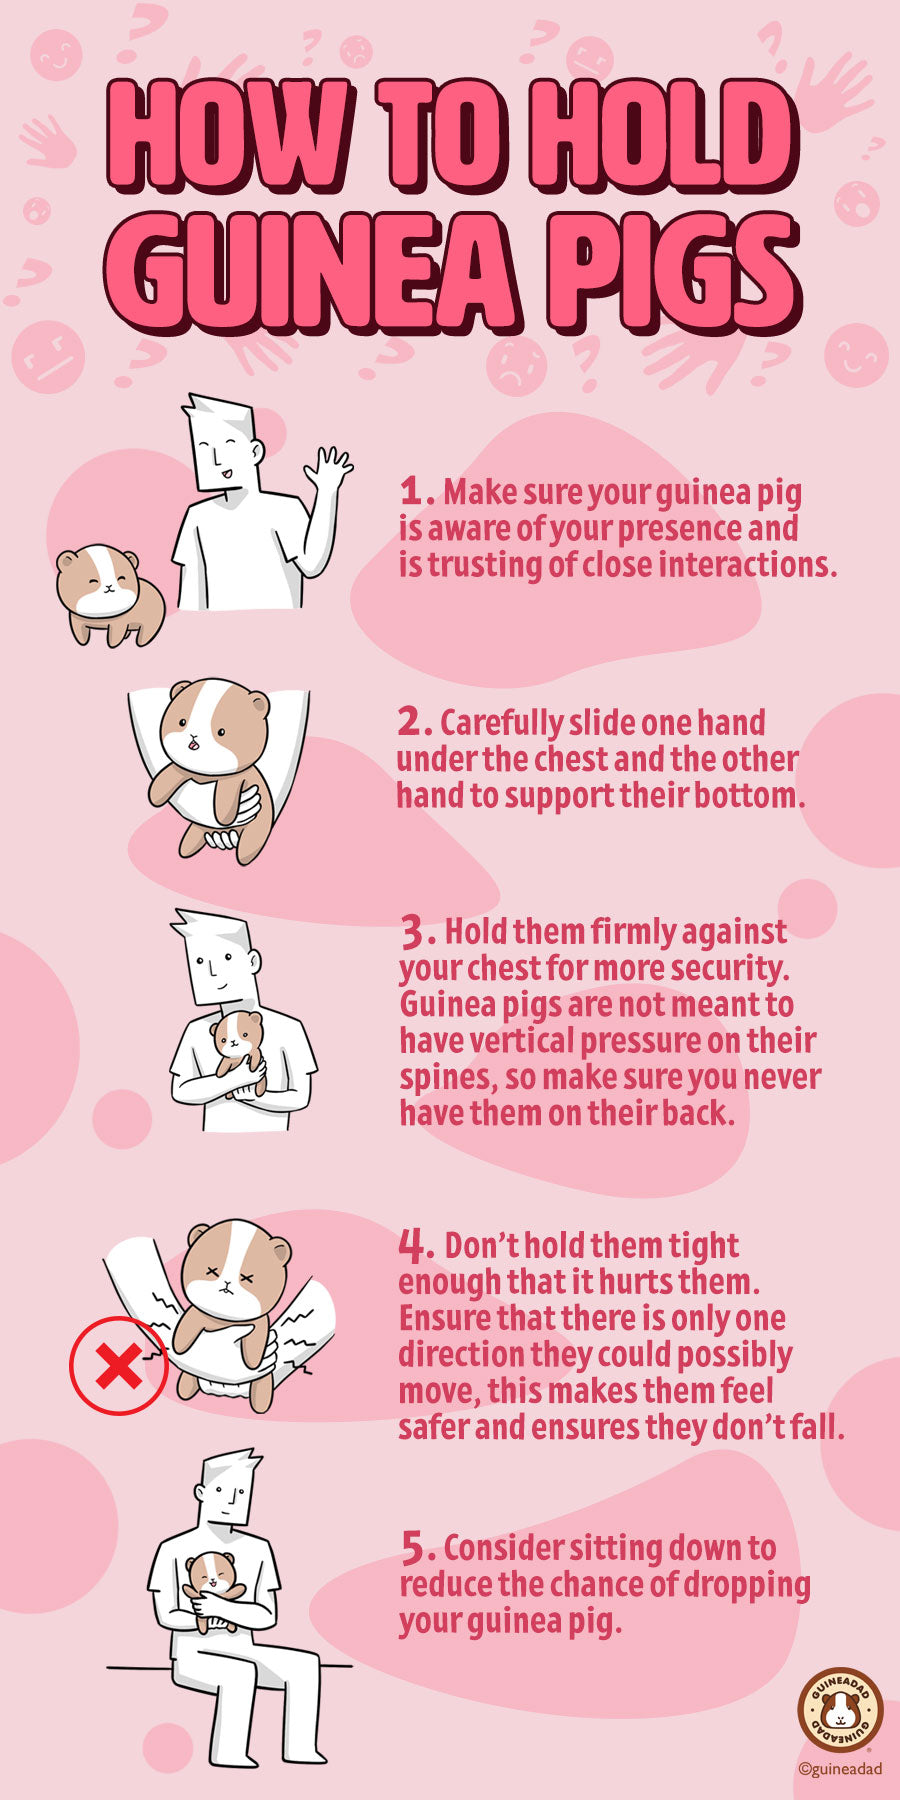 How to Hold Guinea Pigs